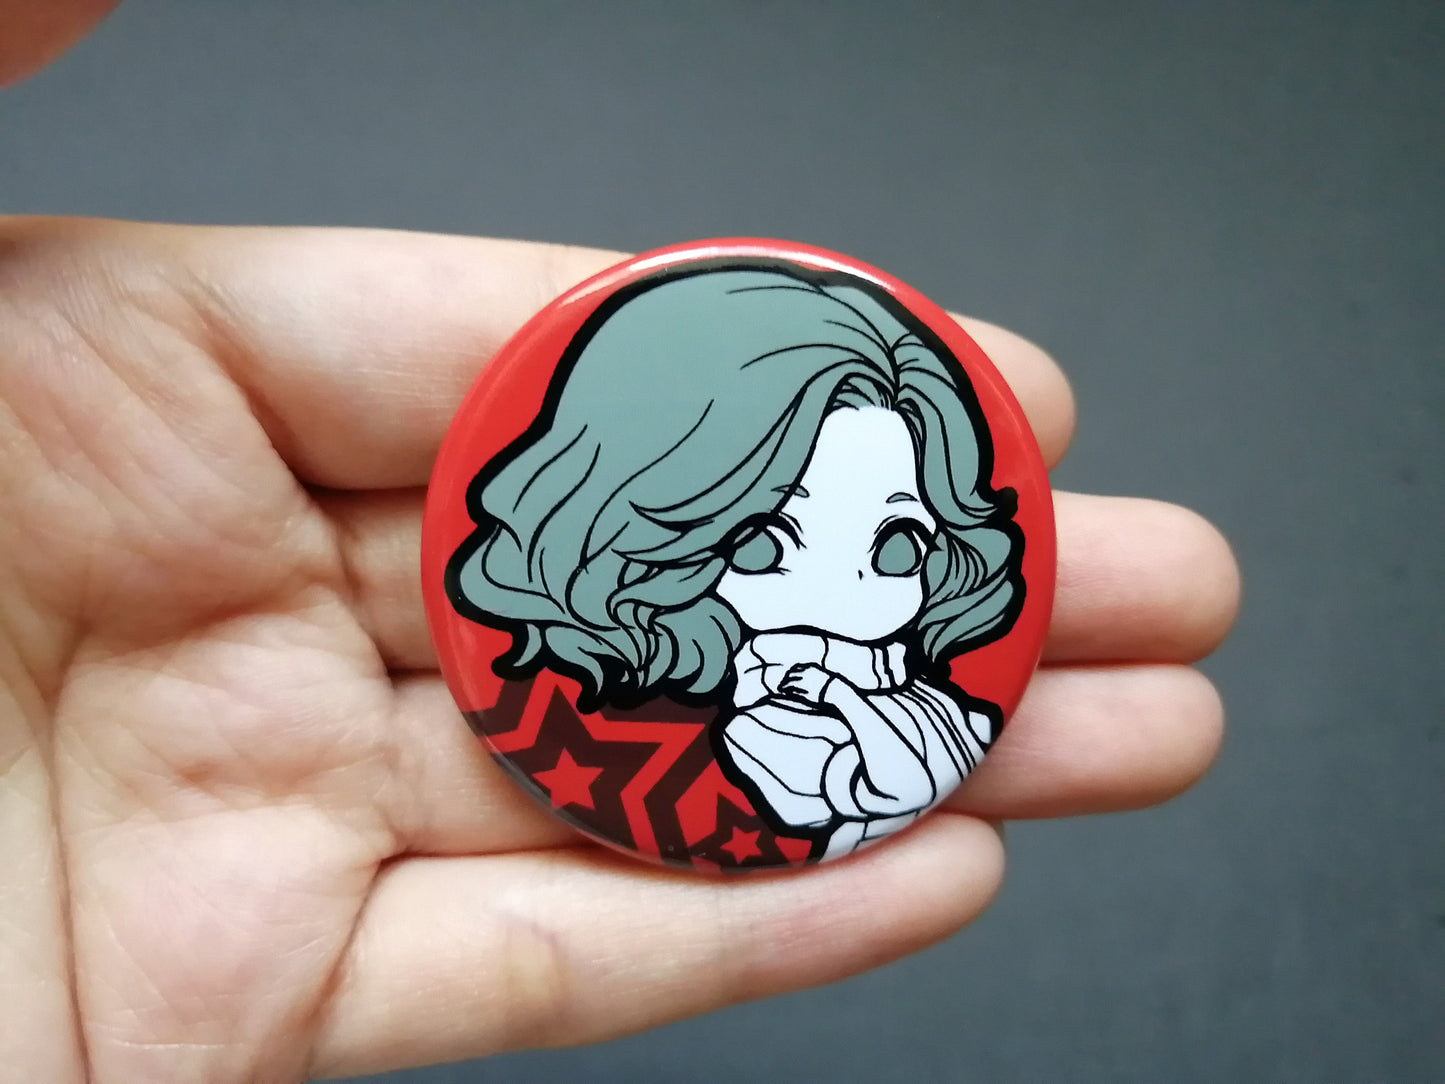 Persona 5 1.75" buttons